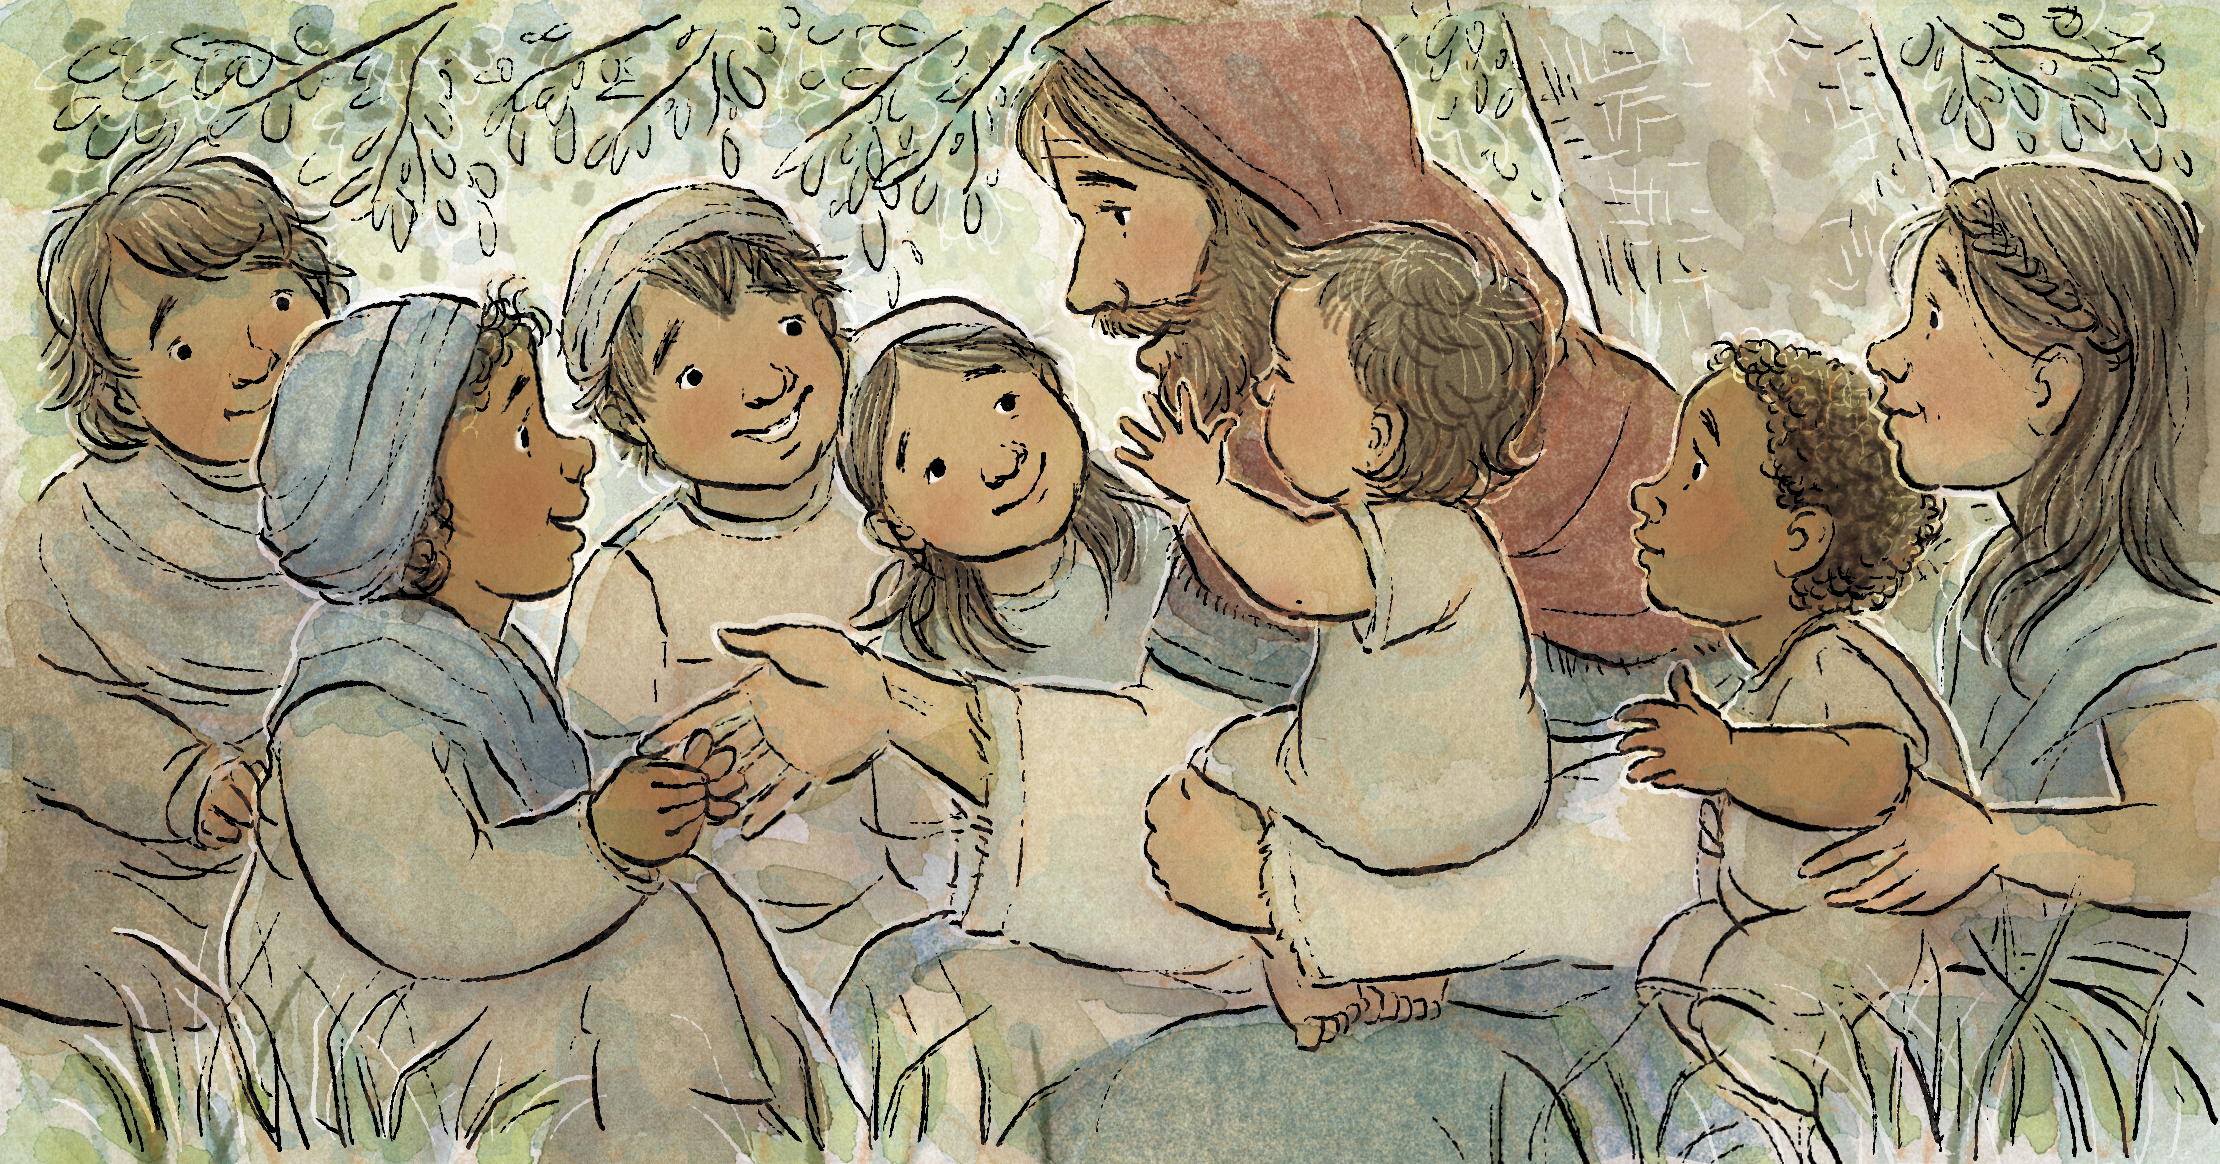 Jesus is sitting with a small child in his arms and other children surrounding him.